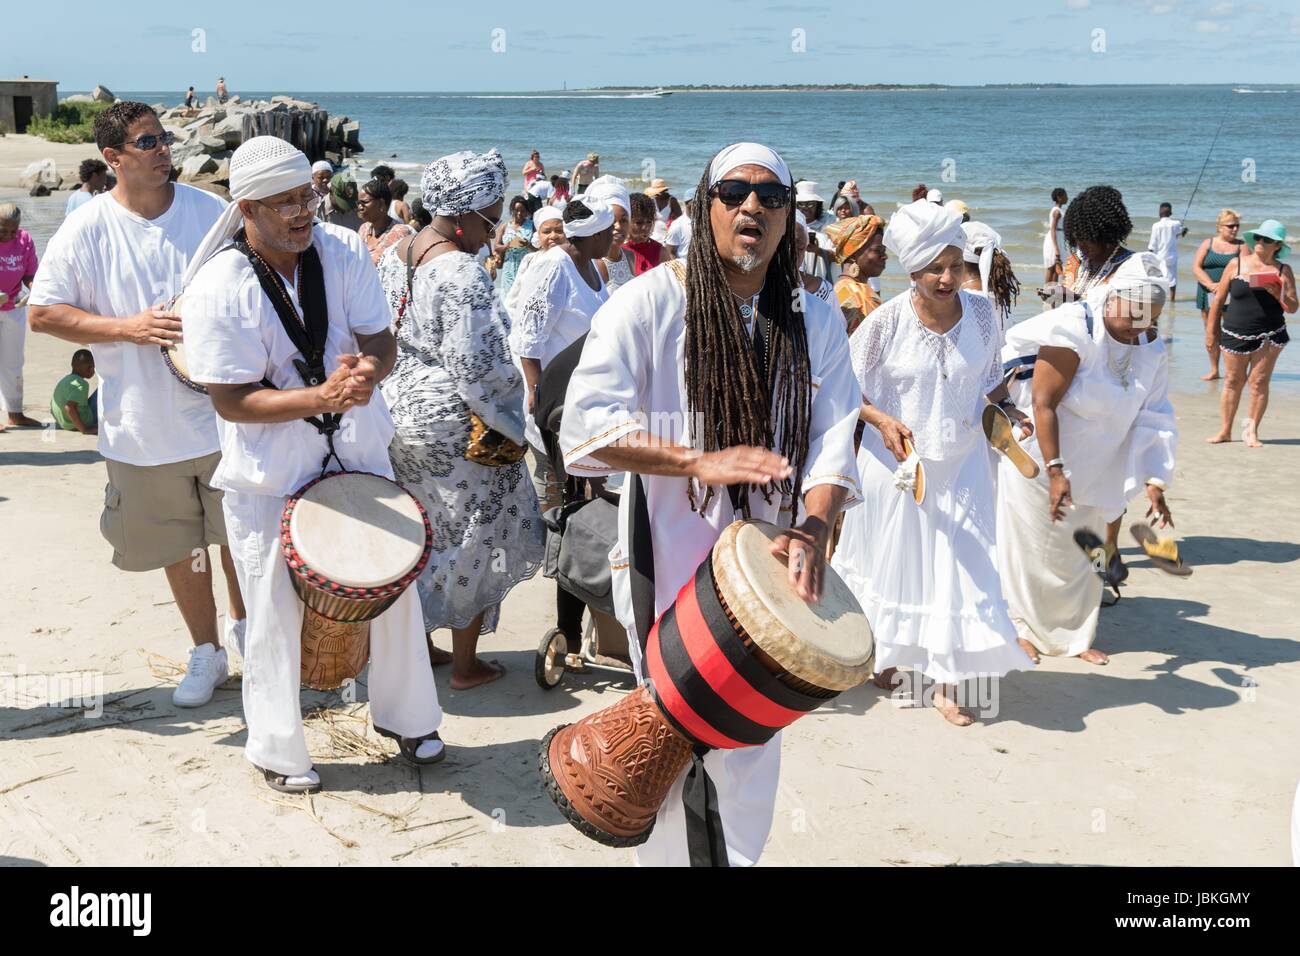 Descendants of enslaved Africans brought to Charleston in the Middle Passage hold a procession to honor their relatives lost during a remembrance ceremony at Fort Moultie National Monument June 10, 2017 in Sullivan's Island, South Carolina. The Middle Passage refers to the triangular trade in which millions of Africans were shipped to the New World as part of the Atlantic slave trade. An estimated 15% of the Africans died at sea and considerably more in the process of capturing and transporting. The number of African deaths attributable to the Middle Passage voyage is estimated at 2 million. Stock Photo